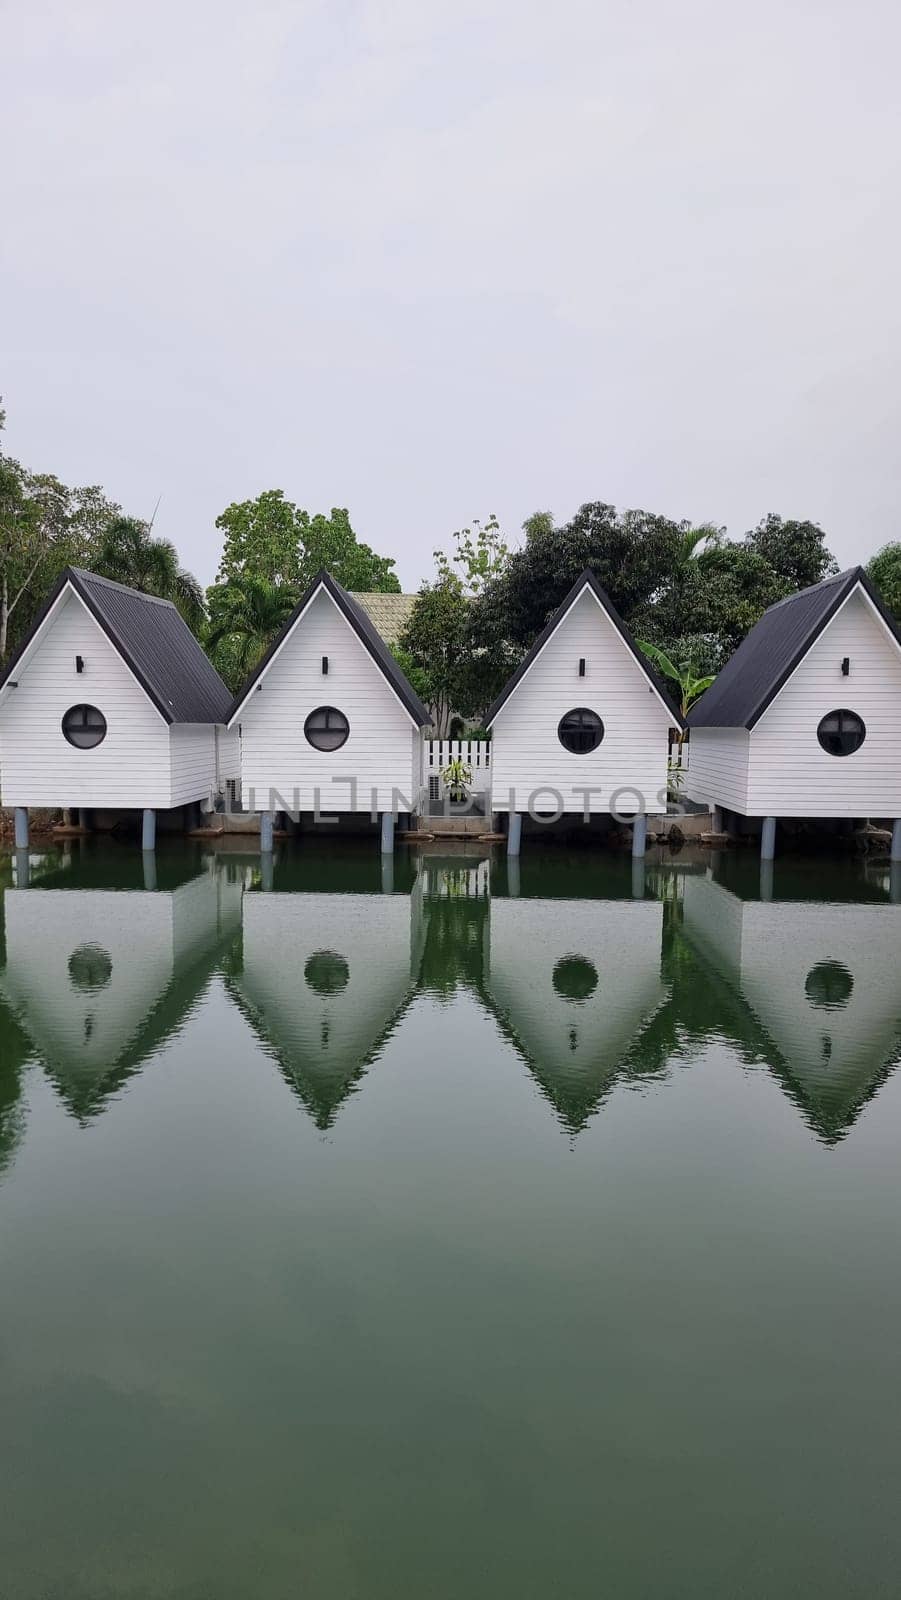 A serene lake reflects a row of charming white houses, creating a picturesque scene of tranquility and beauty by fokkebok